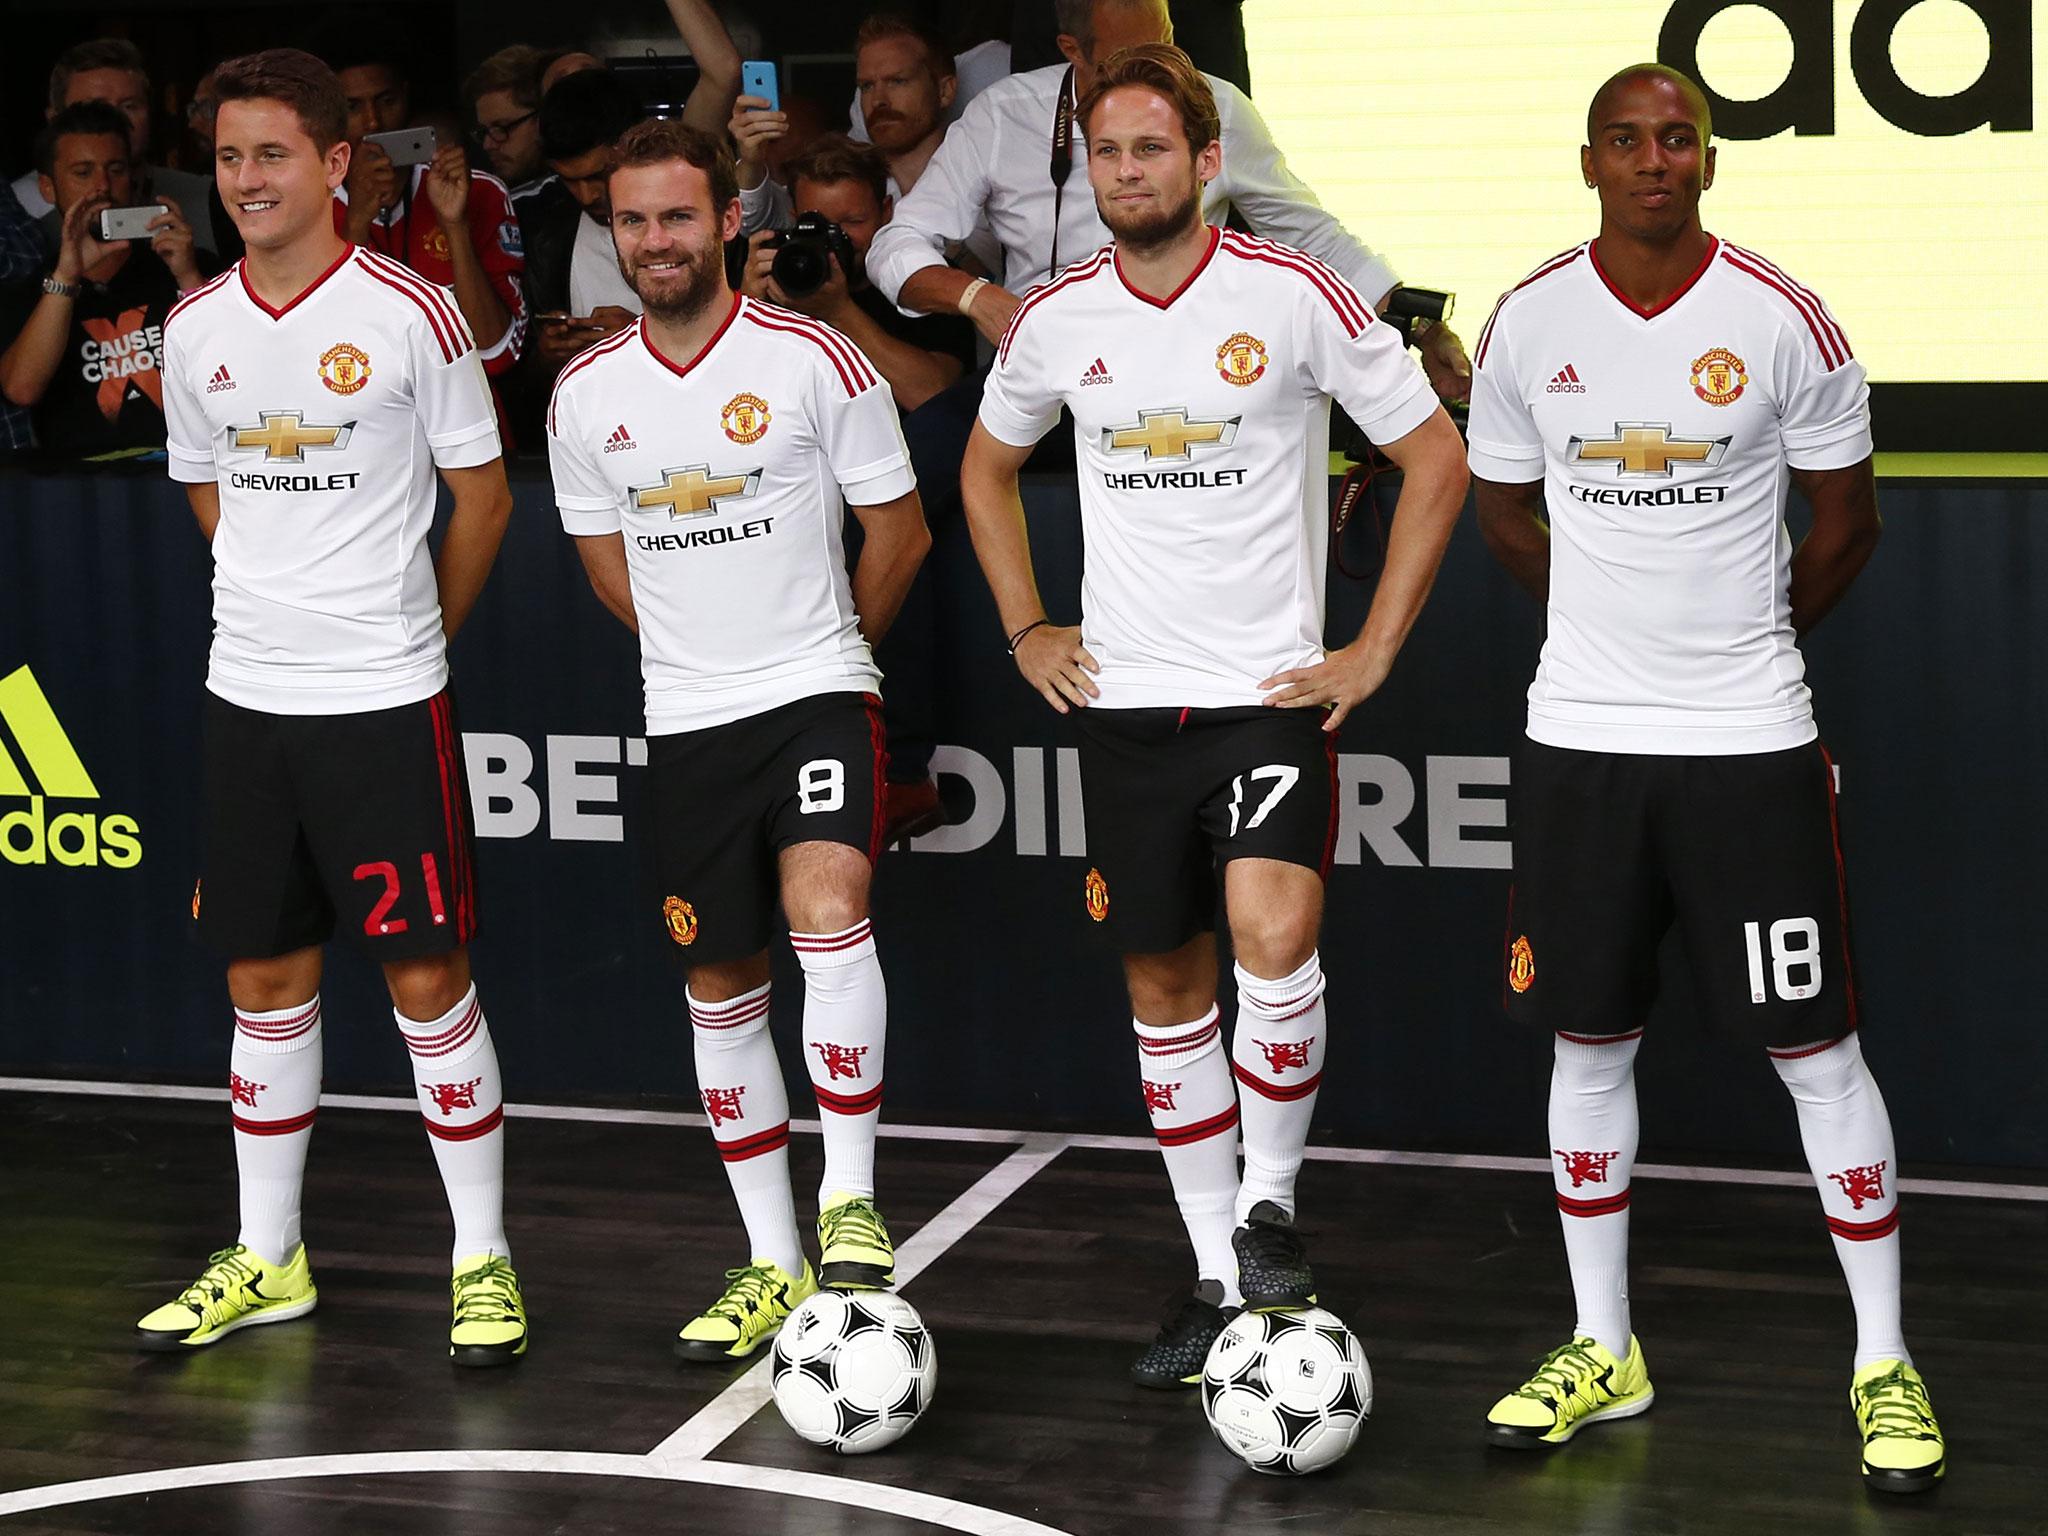 United is in its second season of a 10-year, £750m deal with Adidas